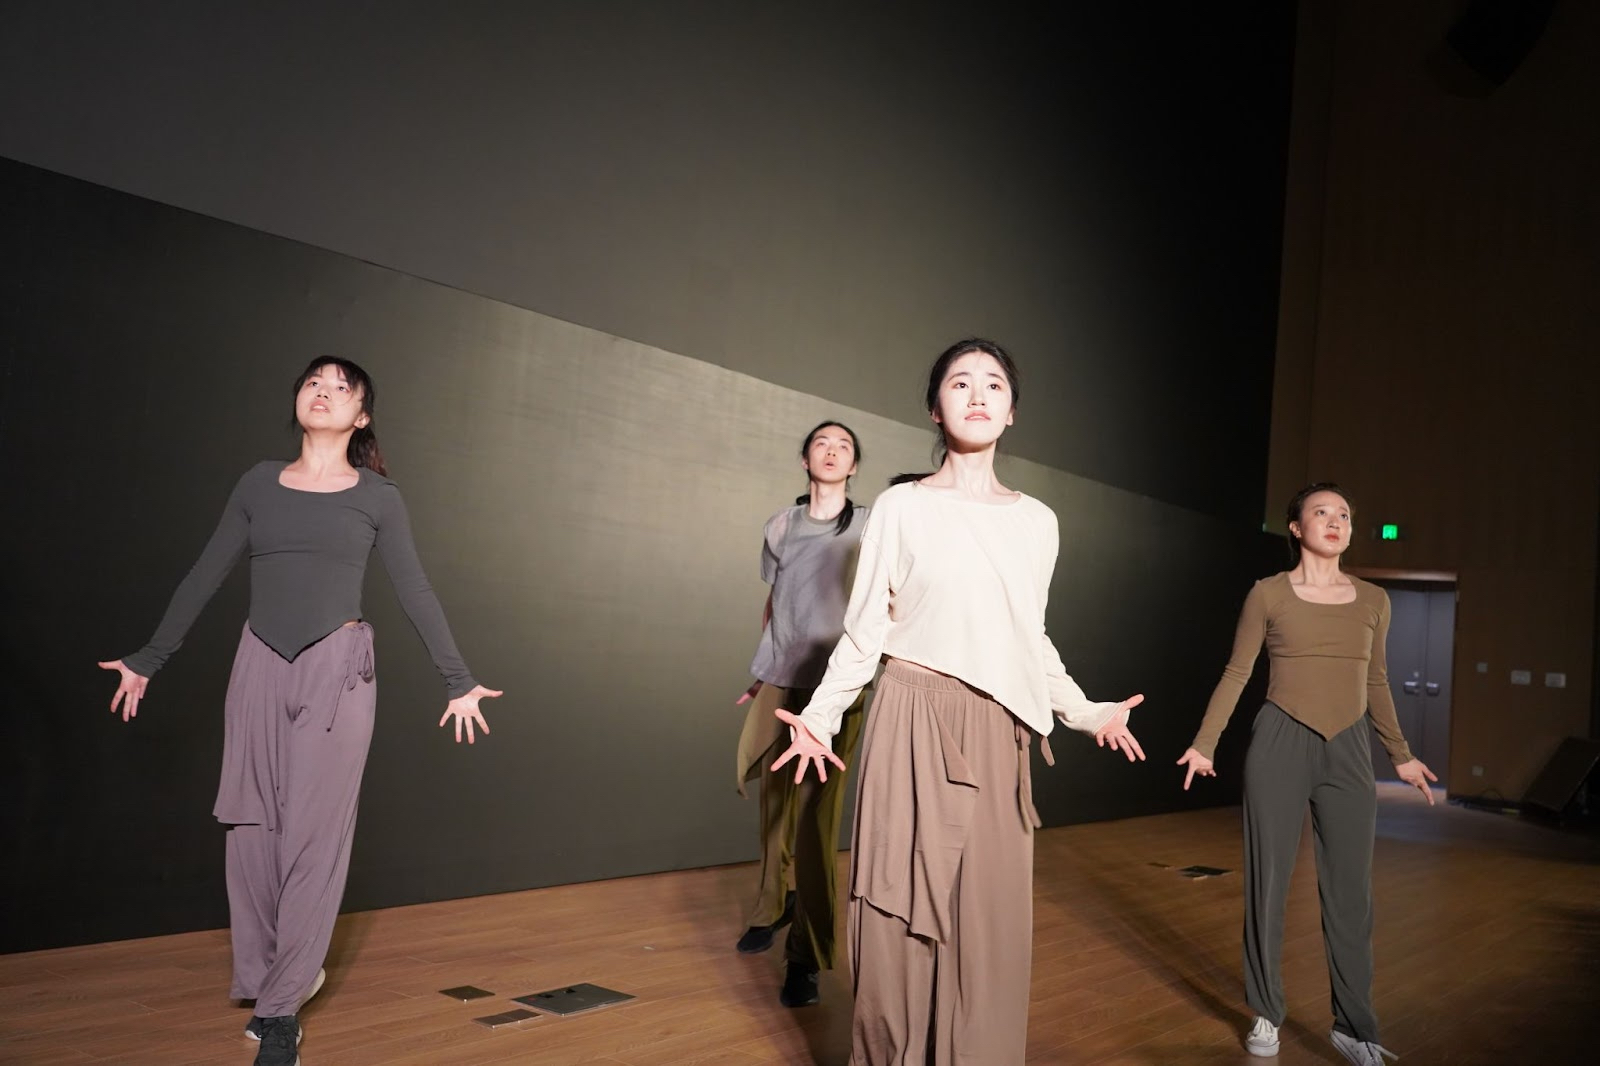 Student choreography by (from left to right) Annie Lu ‘24, Tate Pan ‘24, Yayuan Yang ‘26, and Yuzhuo Sun ‘27, supervised by Assistant Arts Professor of Dance Yuting Zhao.